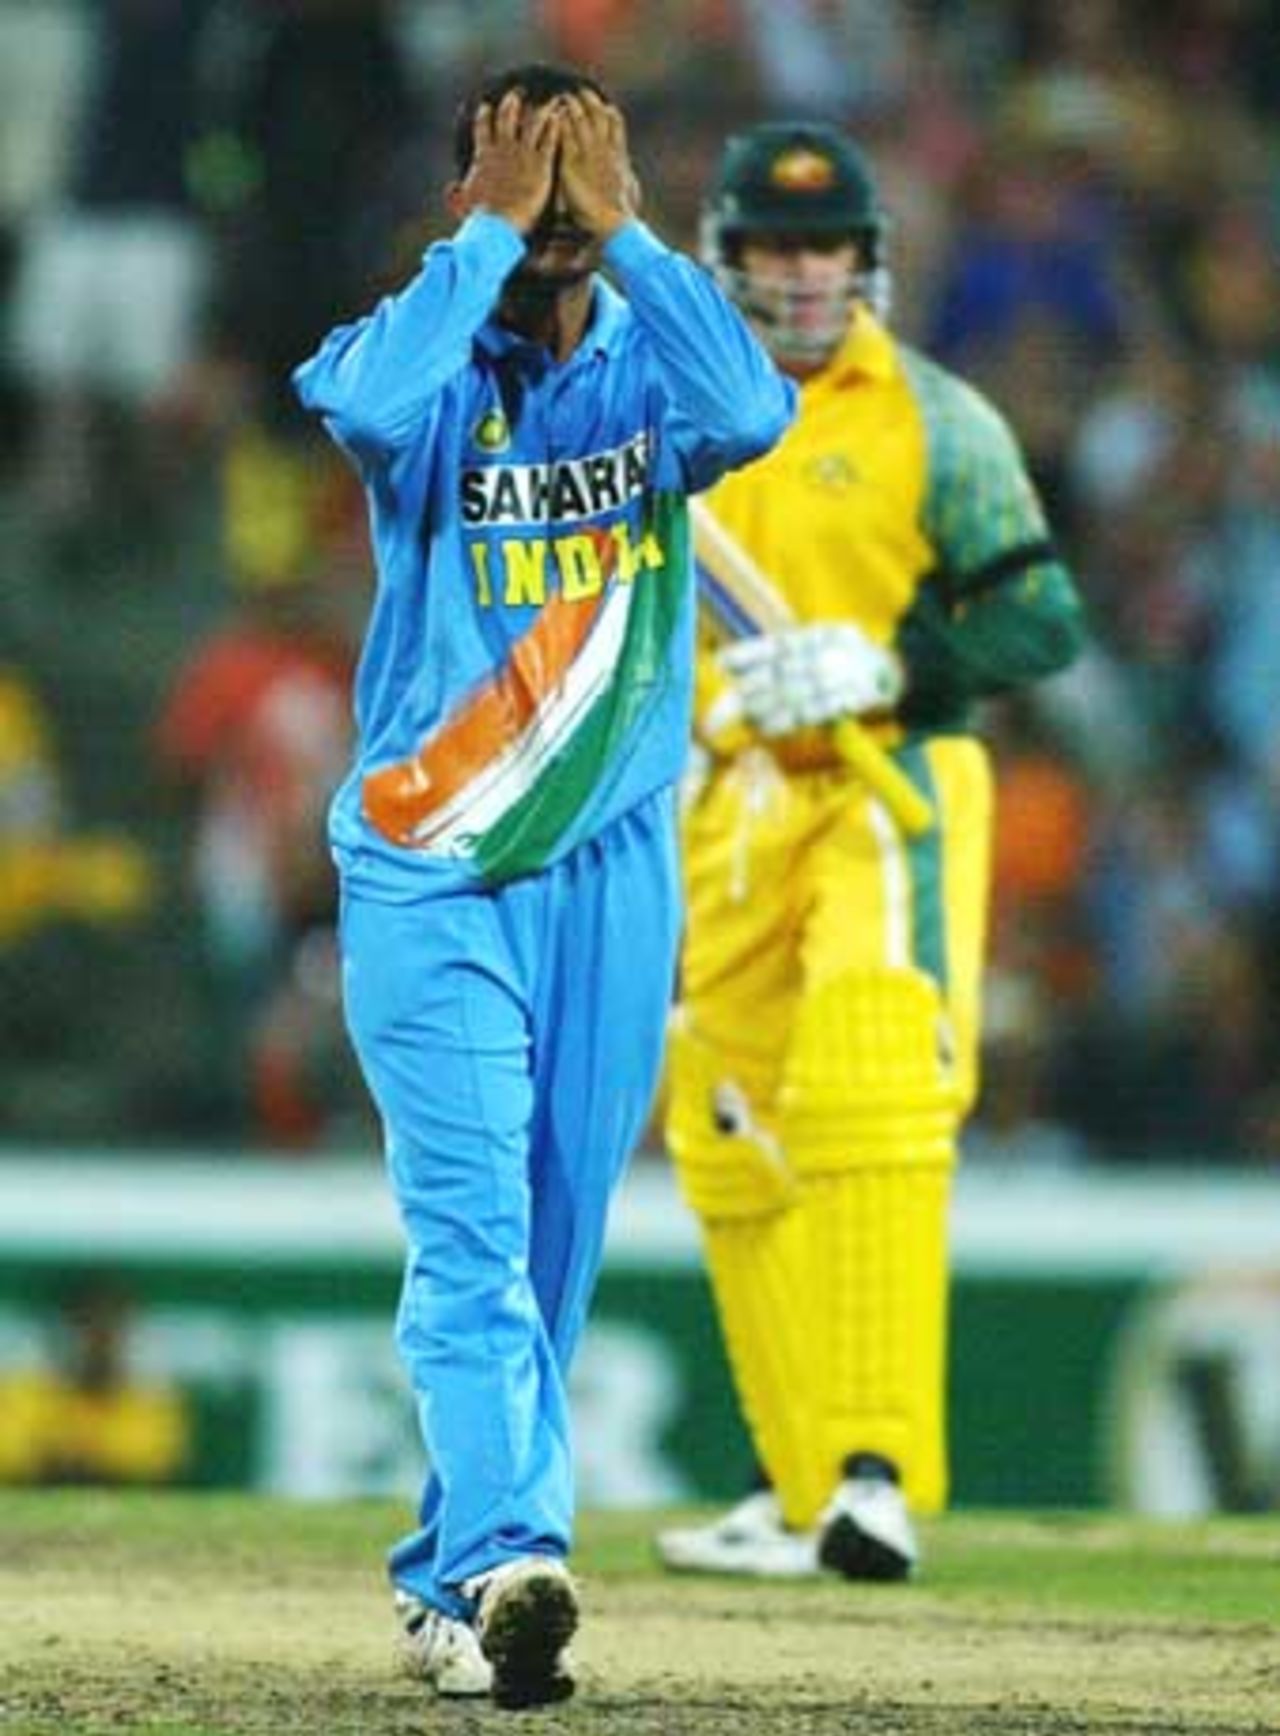 Ganguly convinces himself the investment in youth is worth it, after Parthiv Patel messes up an easy stumping, Australia v India, VB Series, 7th ODI, Sydney, January 22, 2004